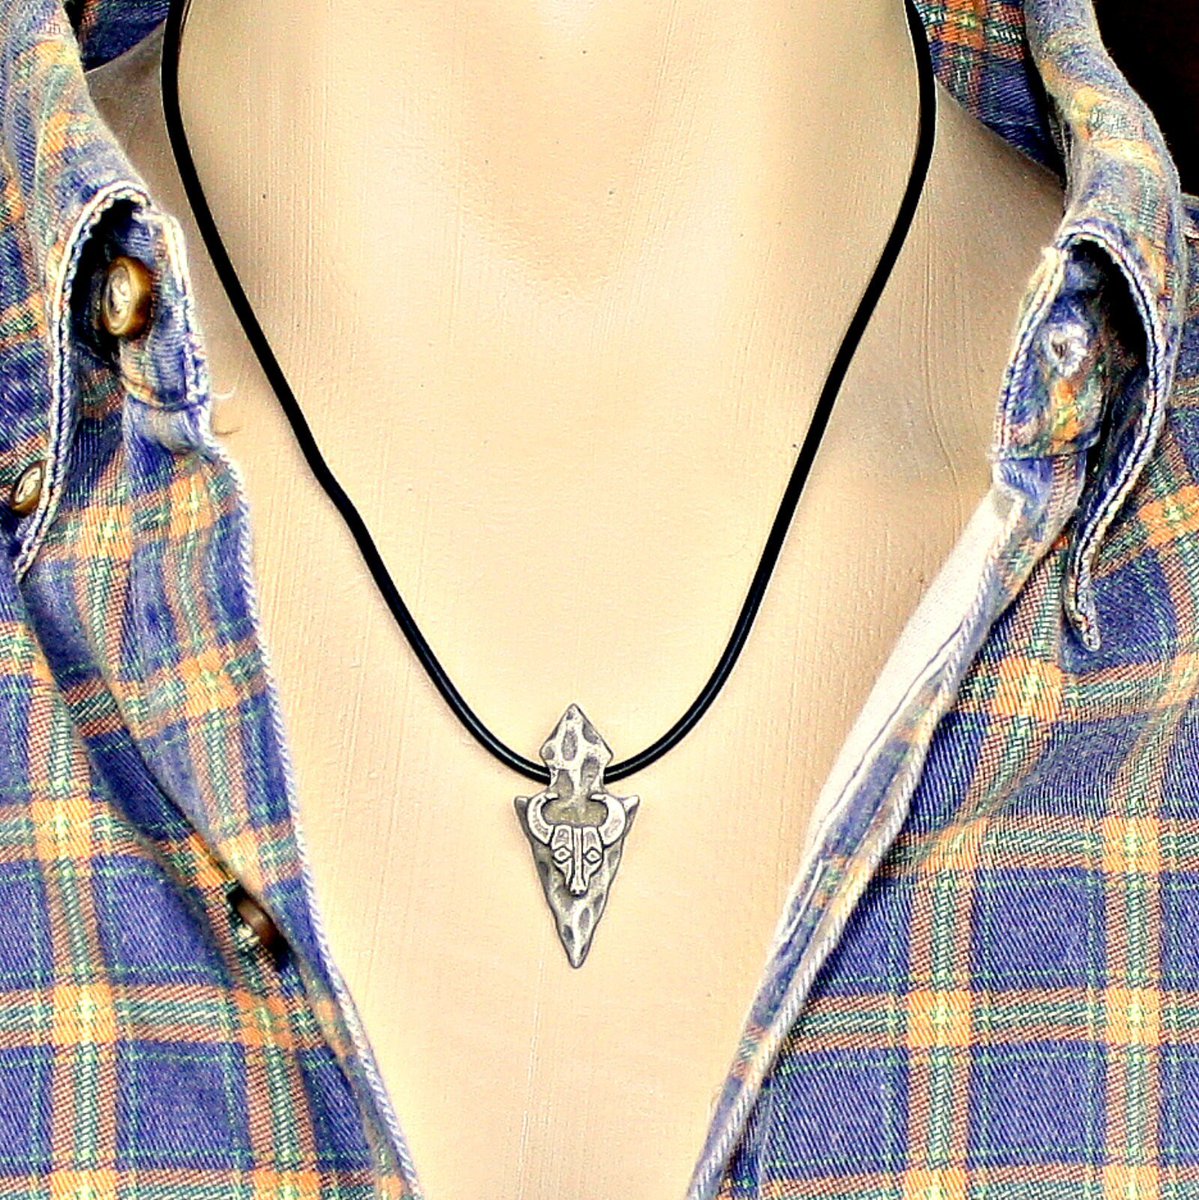 Necklace Pewter Arrowhead with Bull Skull Pendant Adjustable 19 to 21 Inches #MensNecklace #NecklacePendant 
$12.75
➤ grassshacktrading.etsy.com/listing/707192…